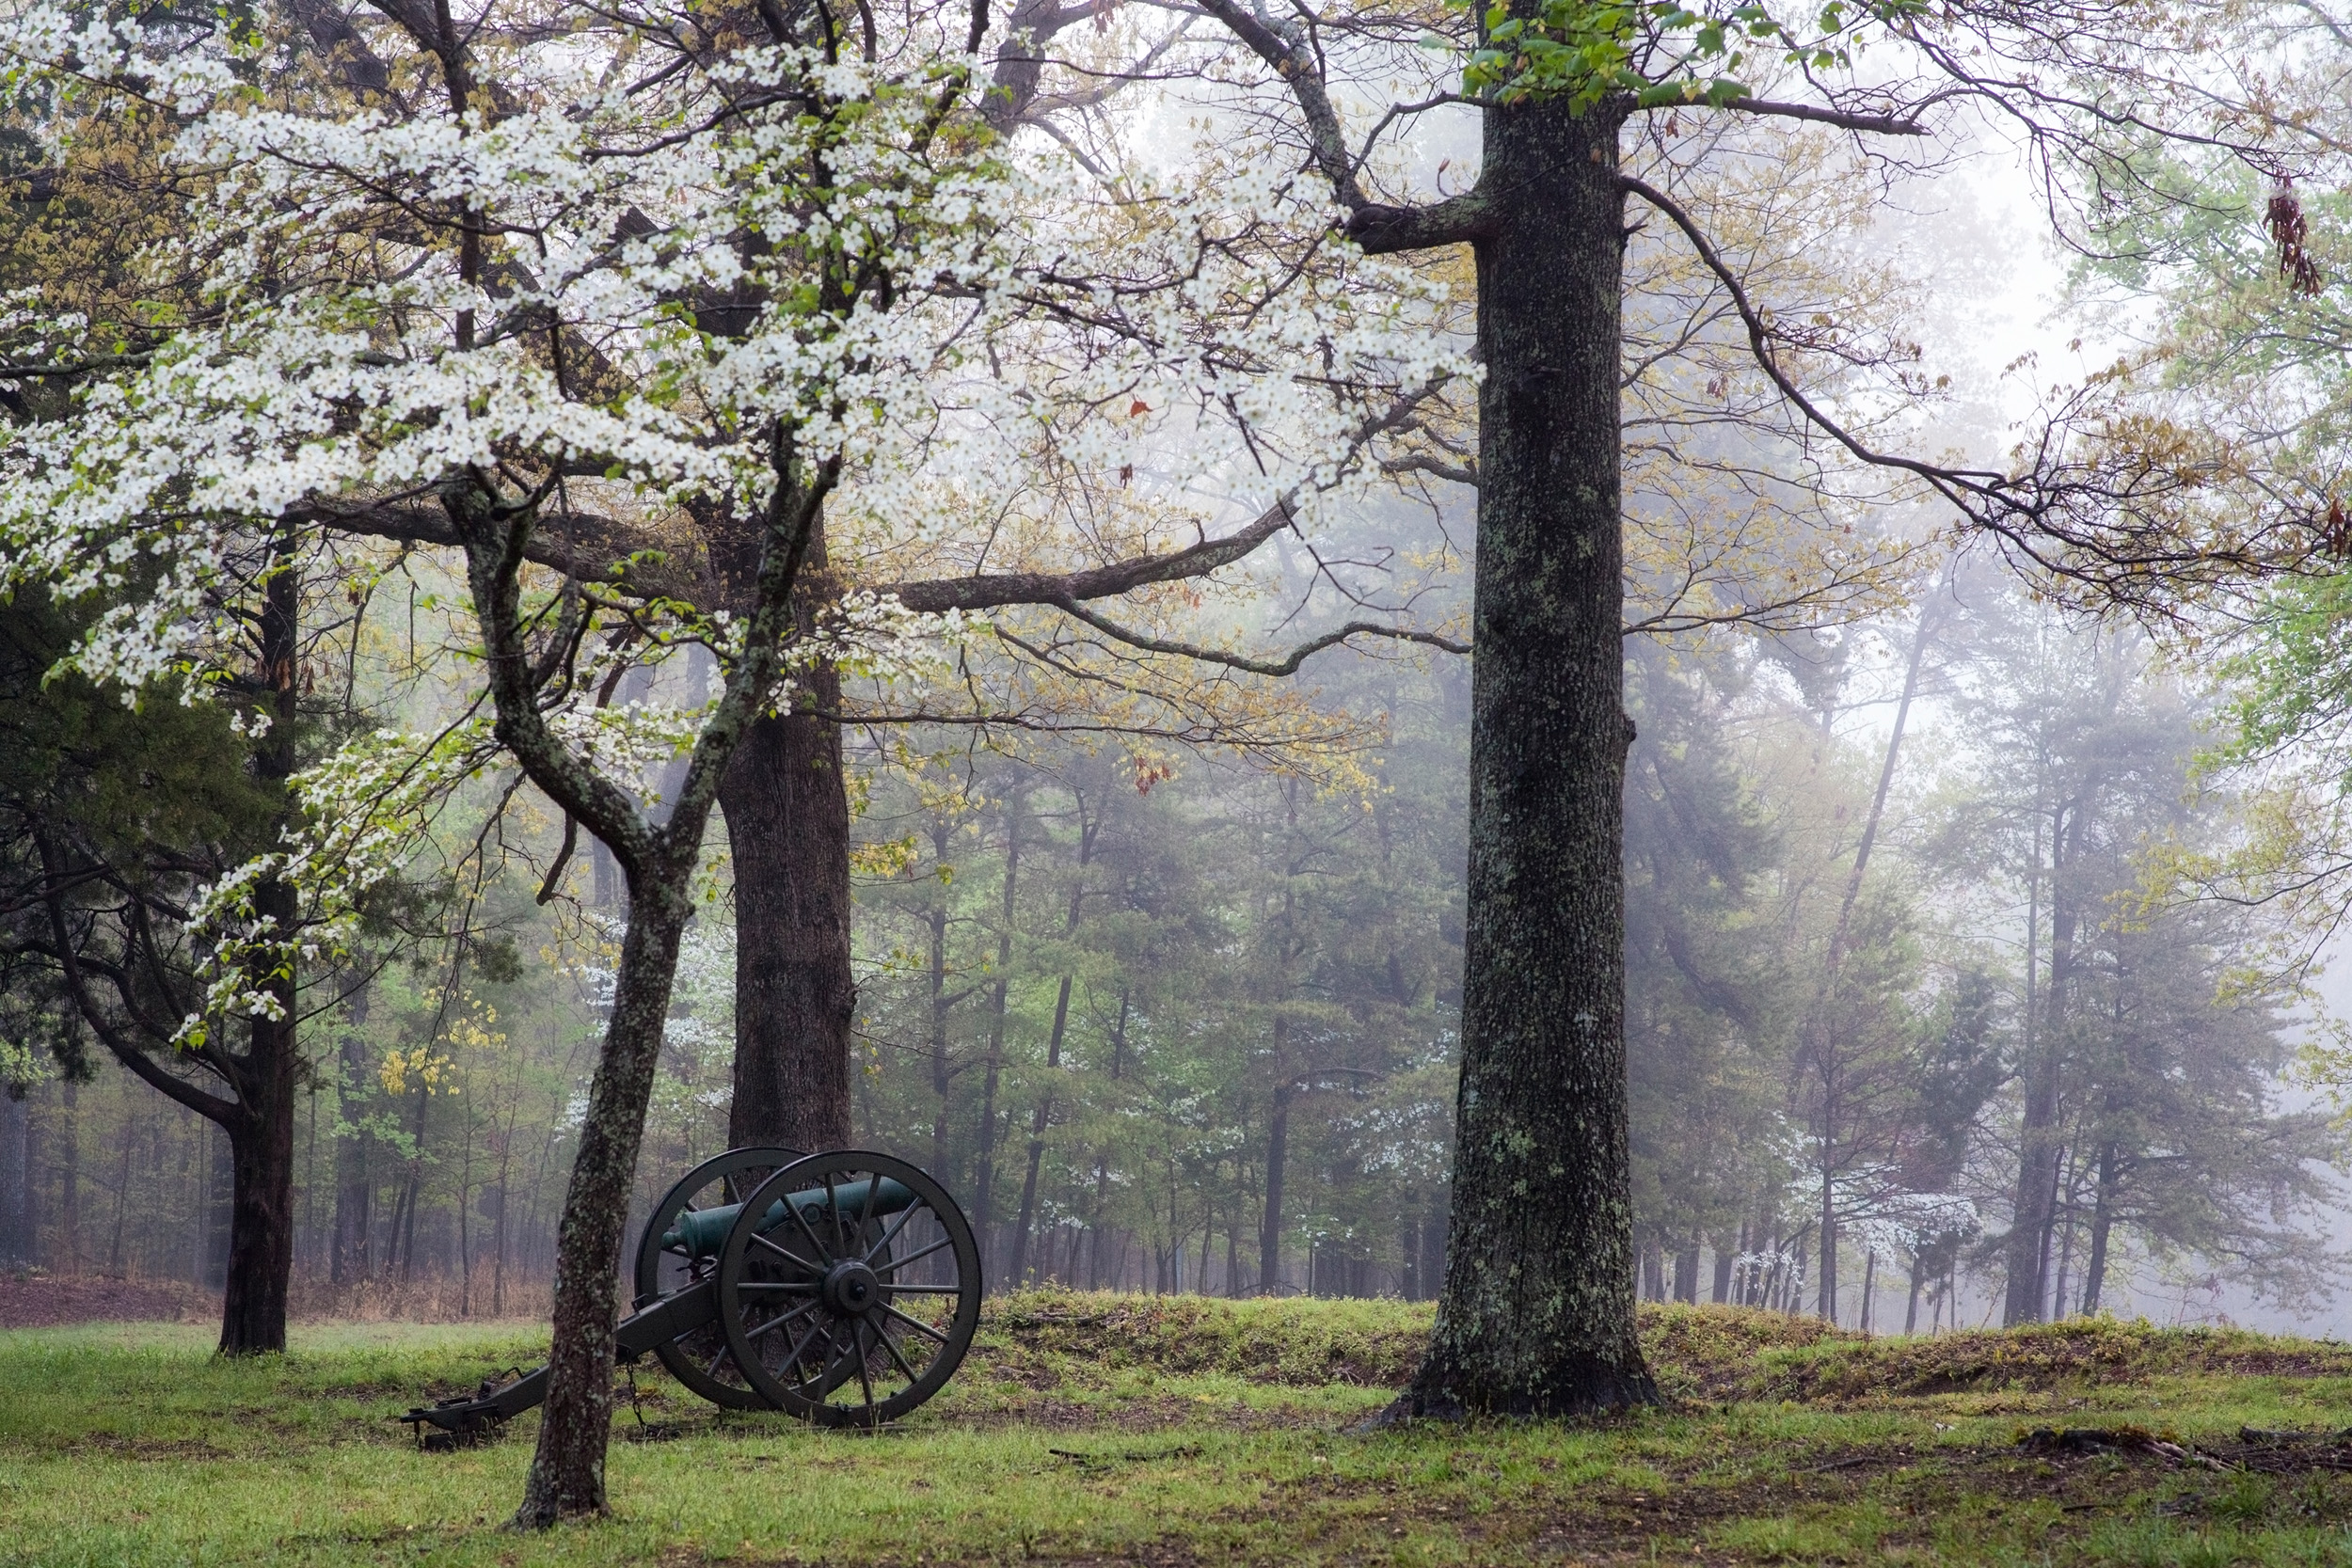 A canon sitting in a foggy field surrounded by blooming dogwood trees.